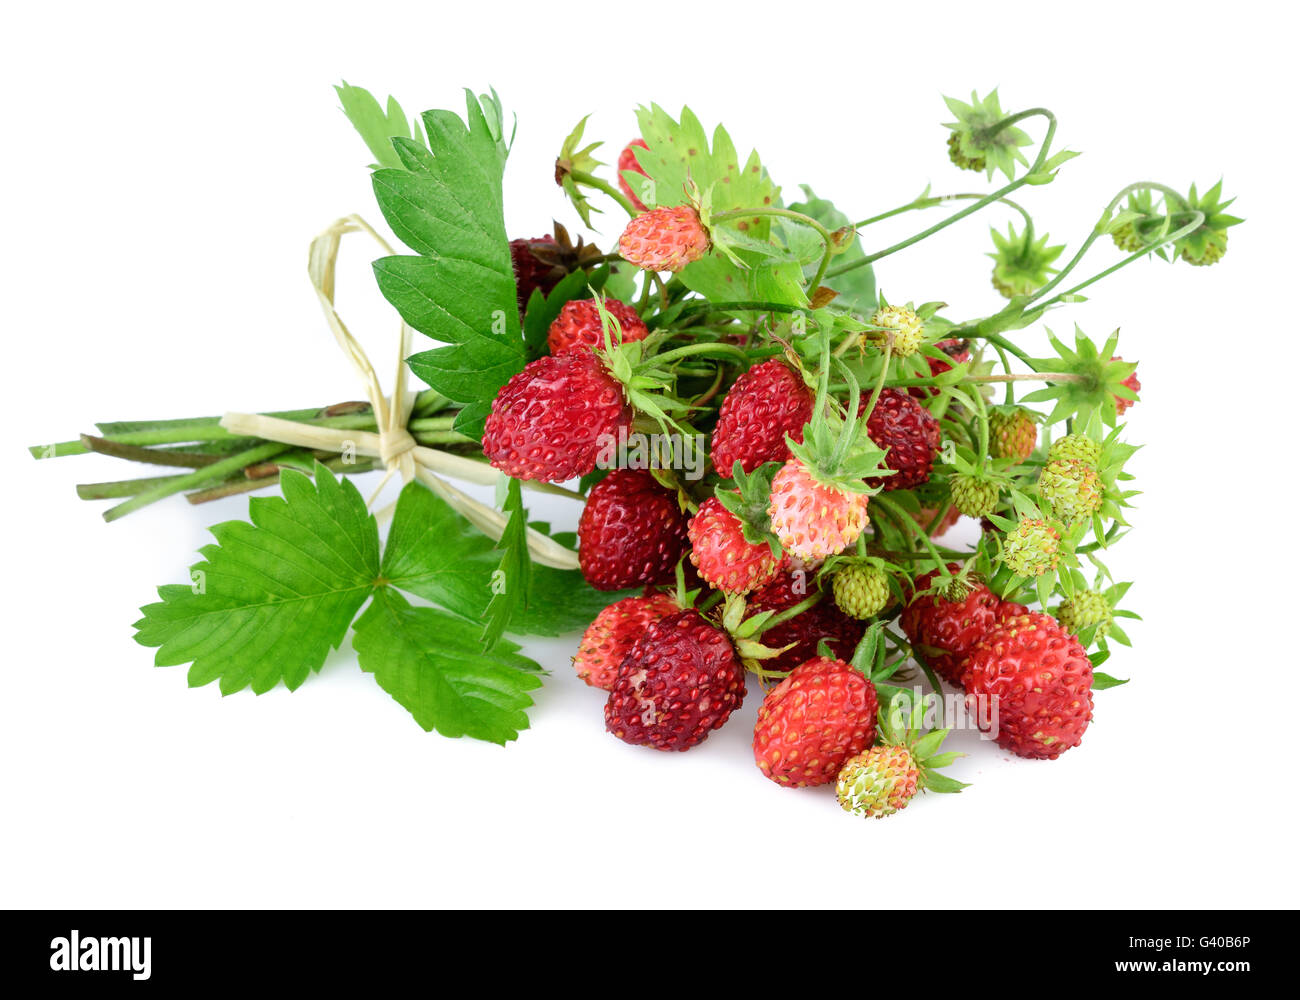 Wild strawberry. Woodland strawberry with leaves on white. Stock Photo